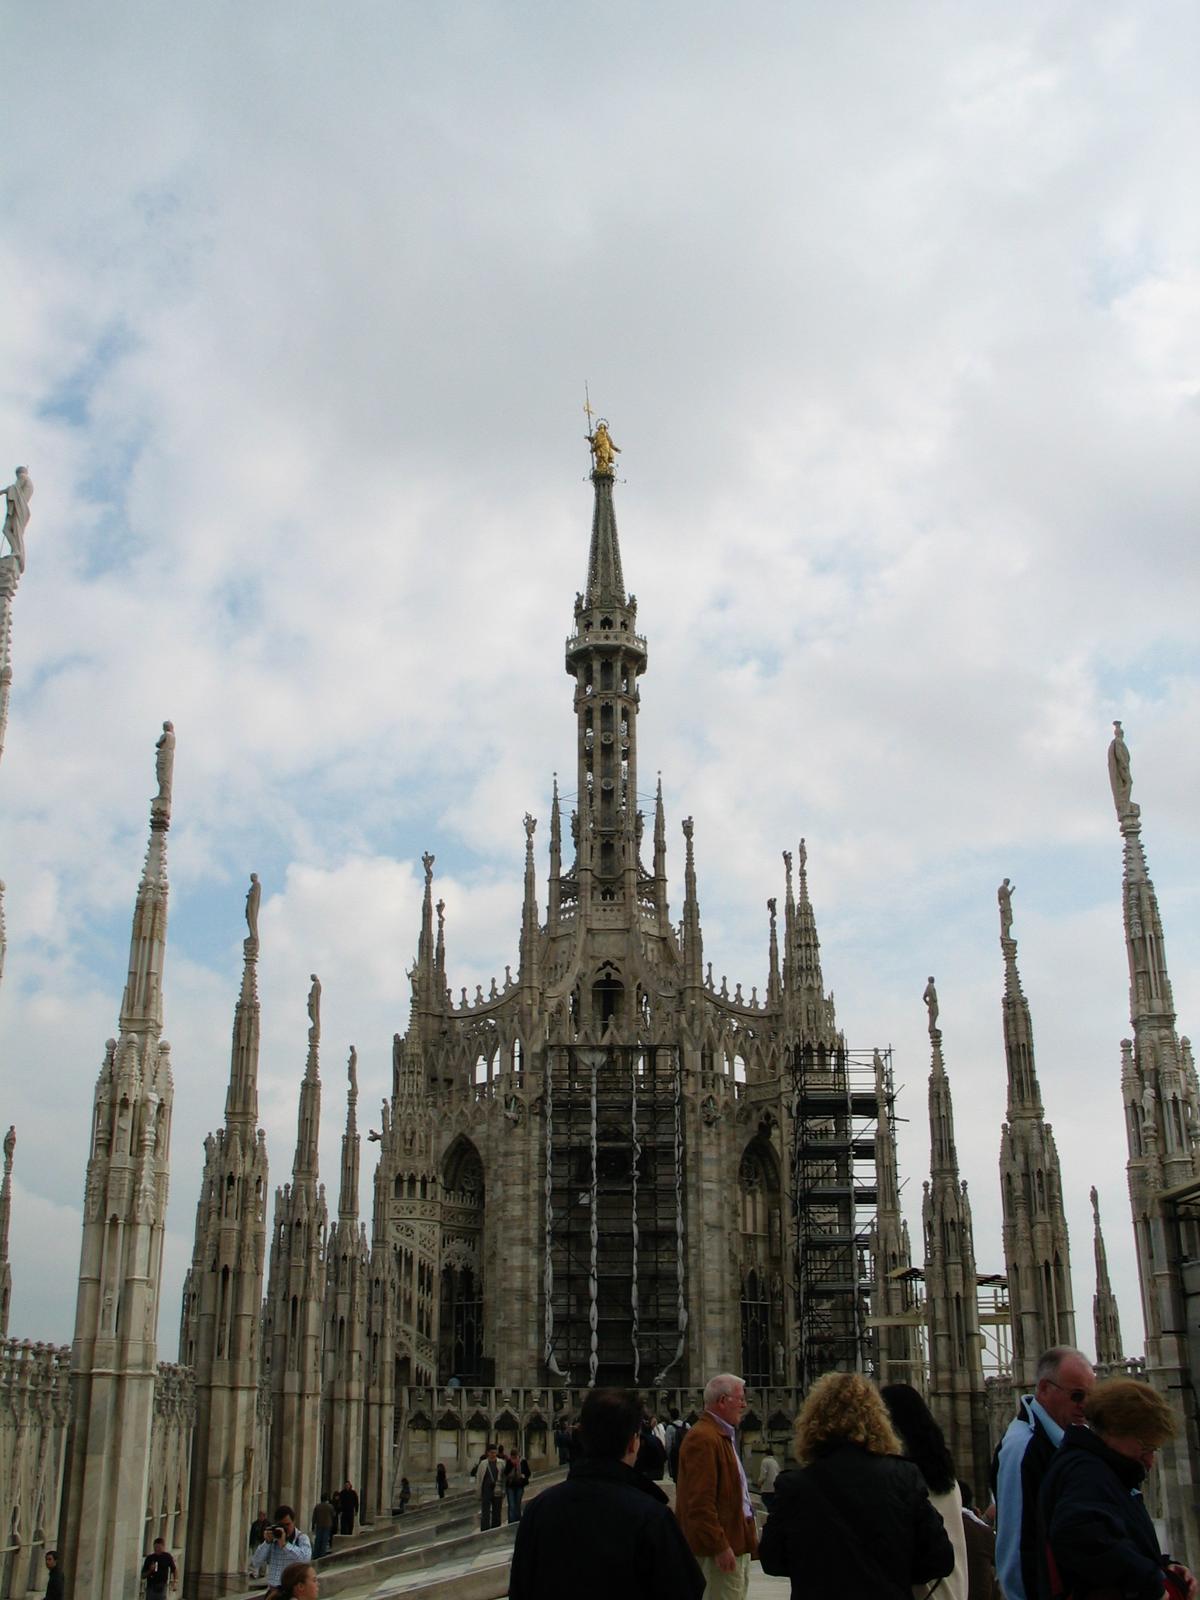 Top of the Duomo